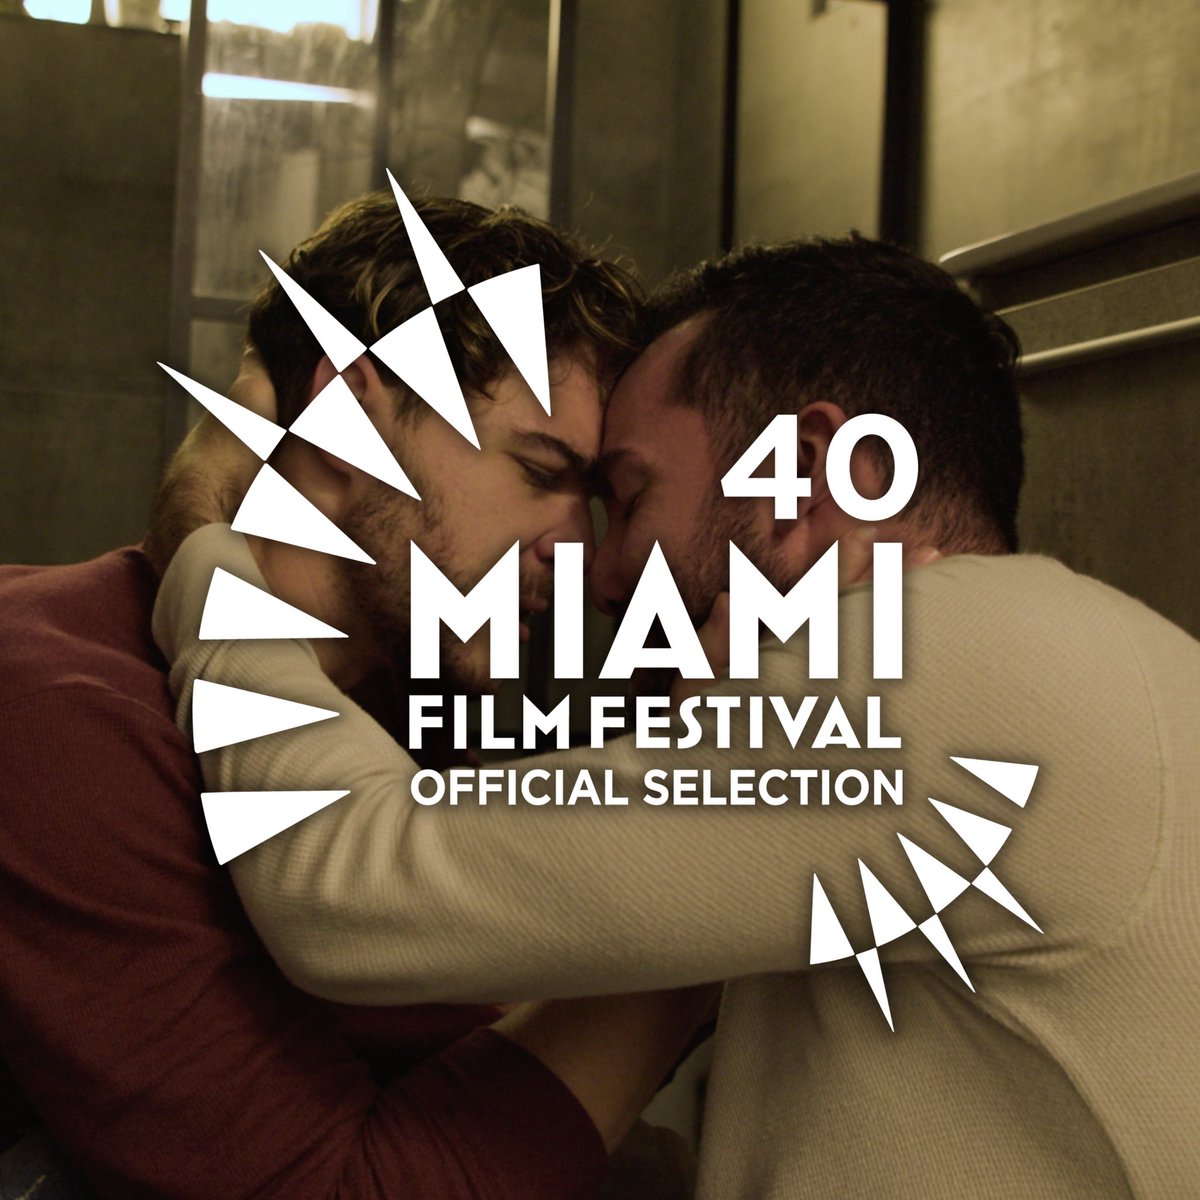 I still can’t believe it! Only 10 days left for my film to be screened at the #MiamiFF 🤩 I’m so excited, happy and nervous about it🥴 Can’t wait to see how all this goes🙈

Buy your tickets 🎟️ now if you haven’t done it yet: squadup.com/events/cinemas…